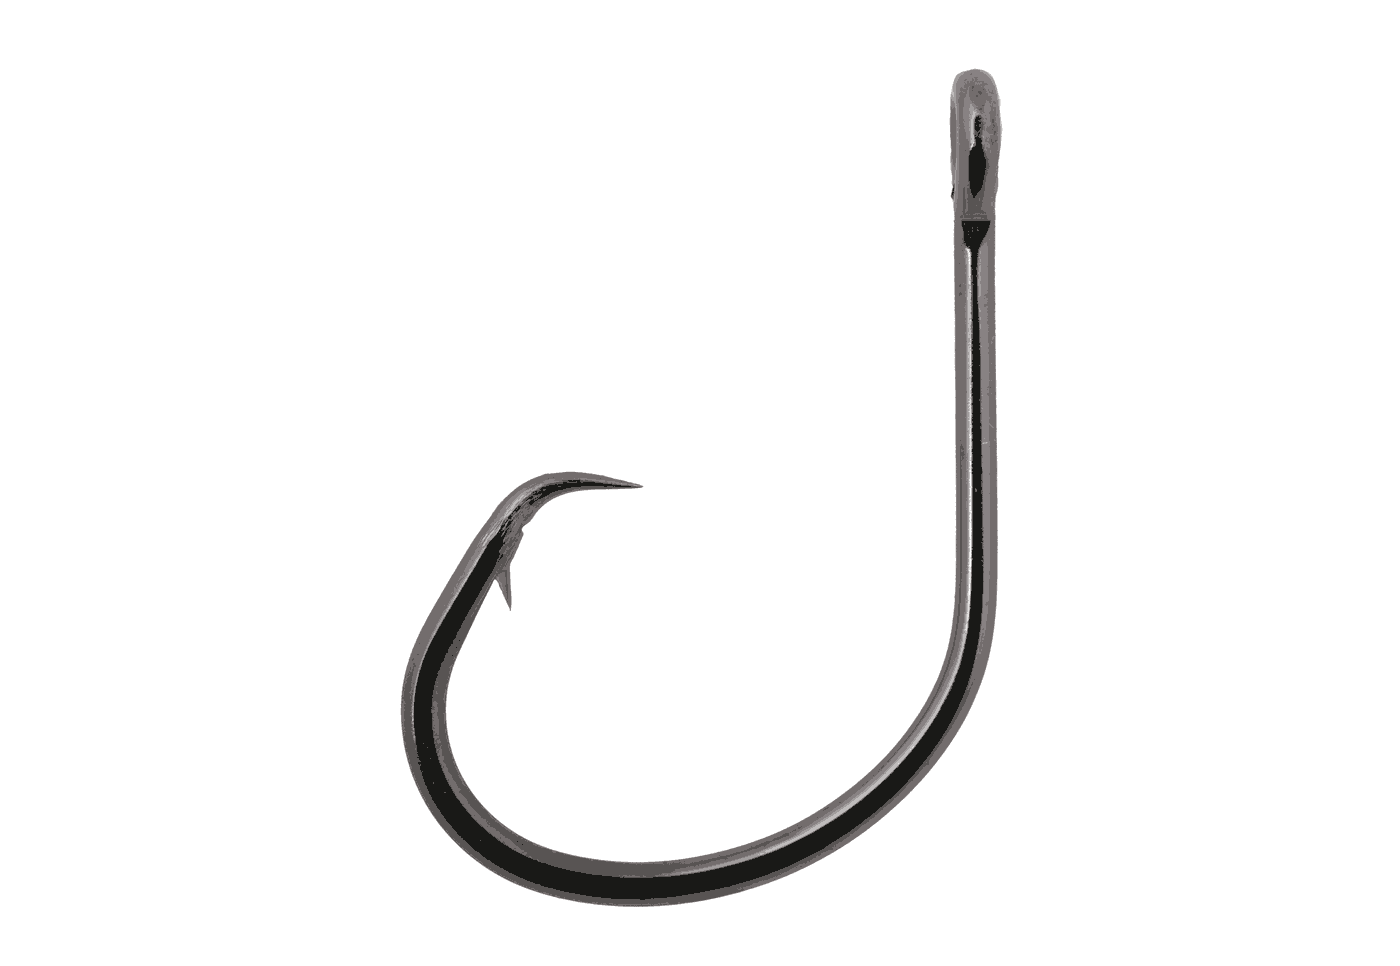 Owner 5179-151 SSW In-Line Circle Hook, Size : 5/0, 7 pcs per pack, Cabral Outdoors